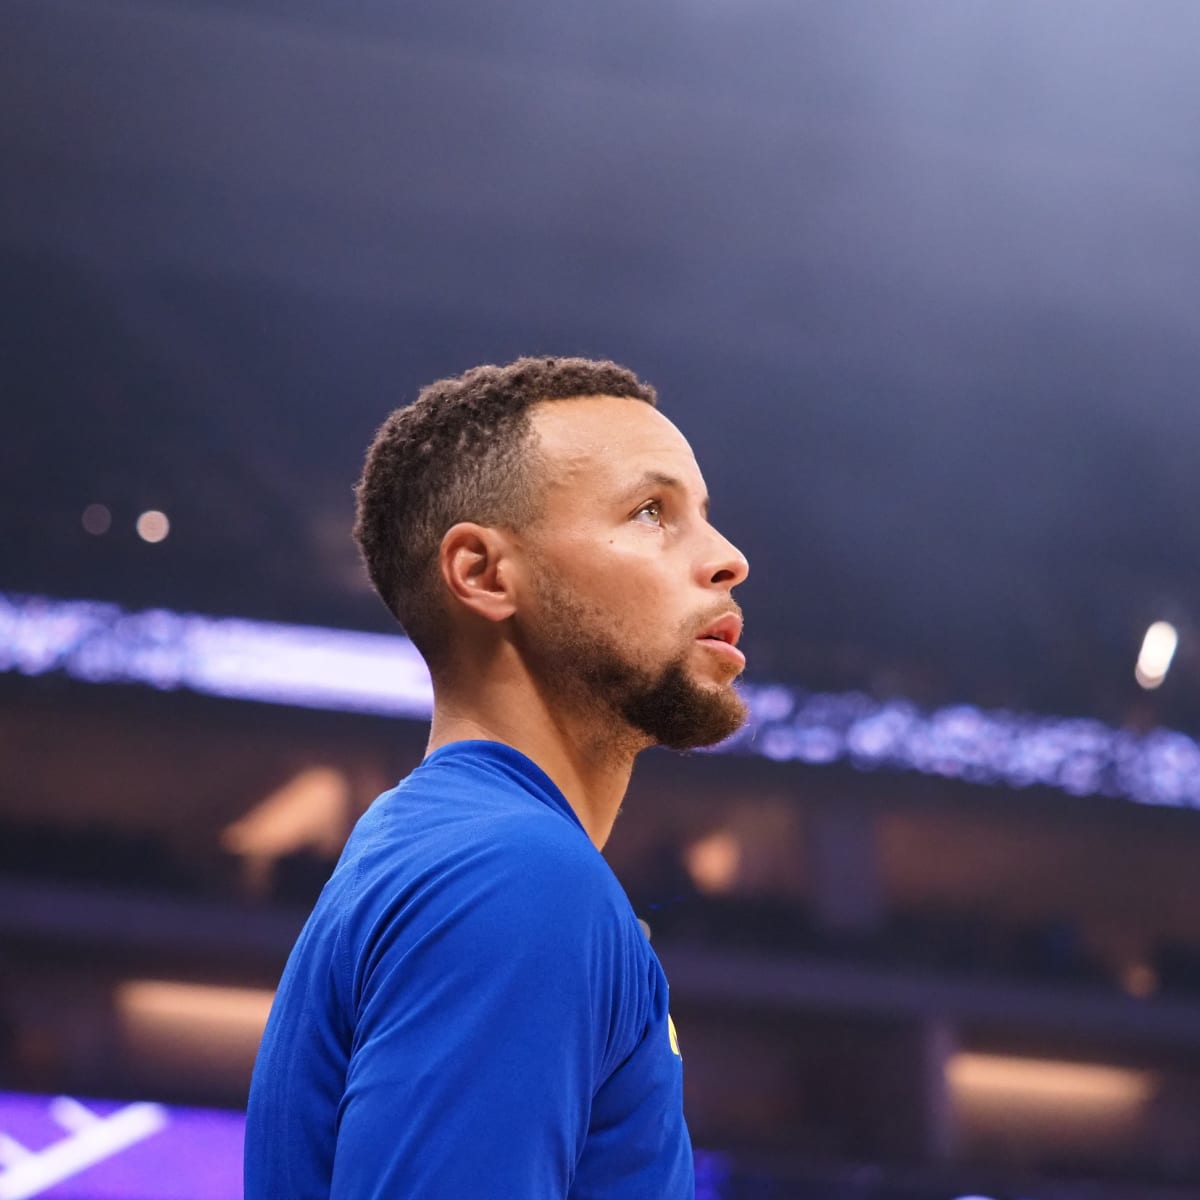 WTF Is Up With Steph Curry's Weird Beard? An Investigation